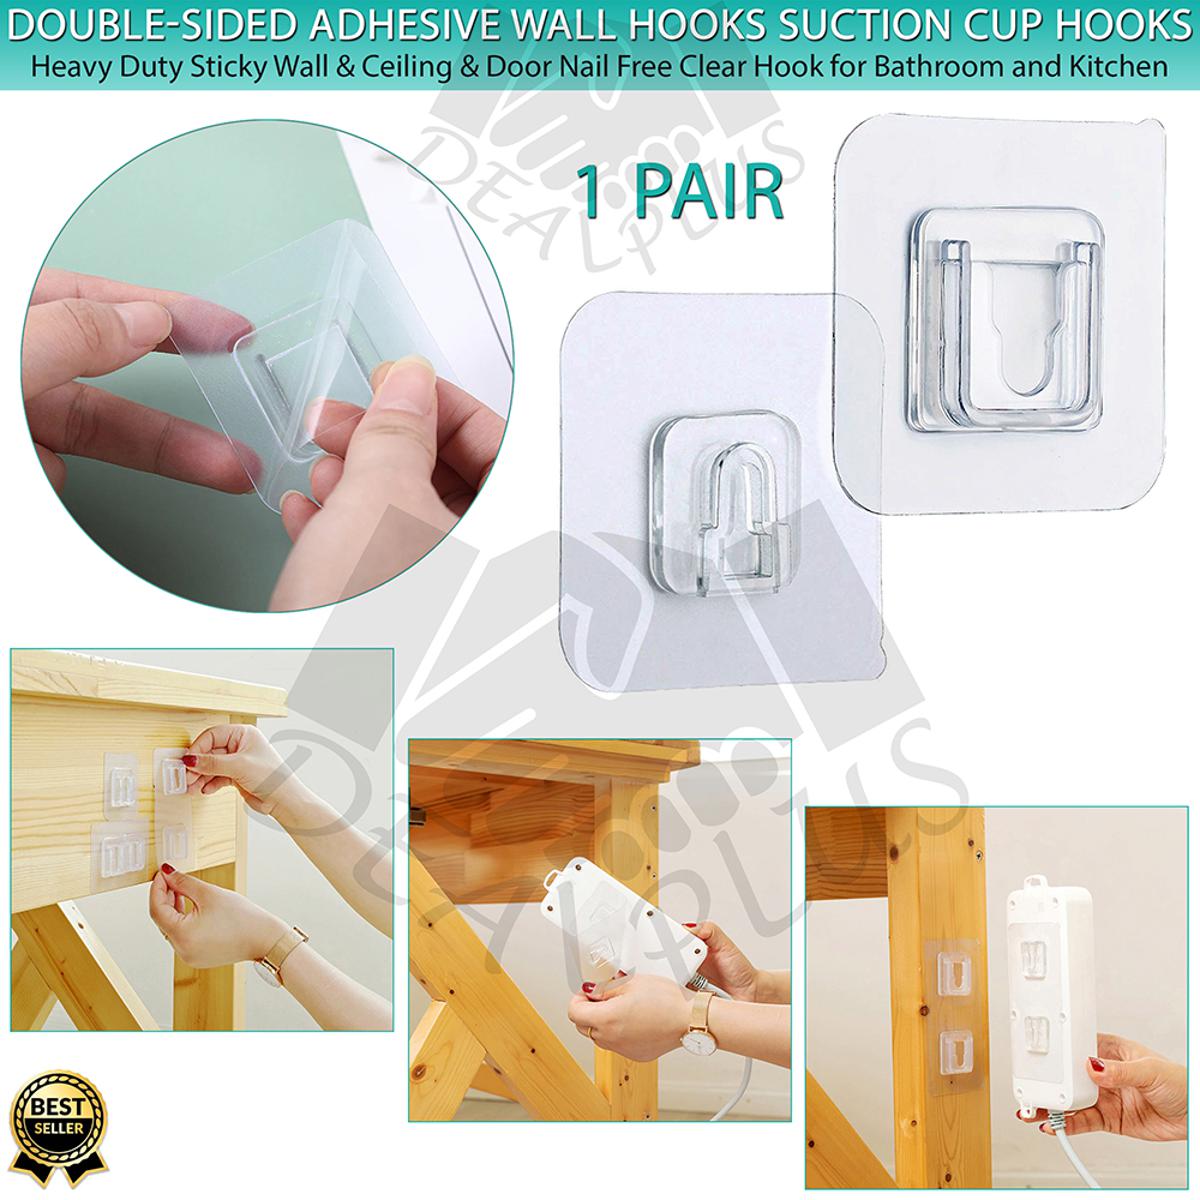 1 Pair Double-sided Adhesive Wall Hooks Suction Cup Hooks stick hook Heavy  Duty Sticky Wall & Ceiling & Door Nail Free Clear Hook for Bathroom and  Kitchen No Scratch Waterproof and Oilproof